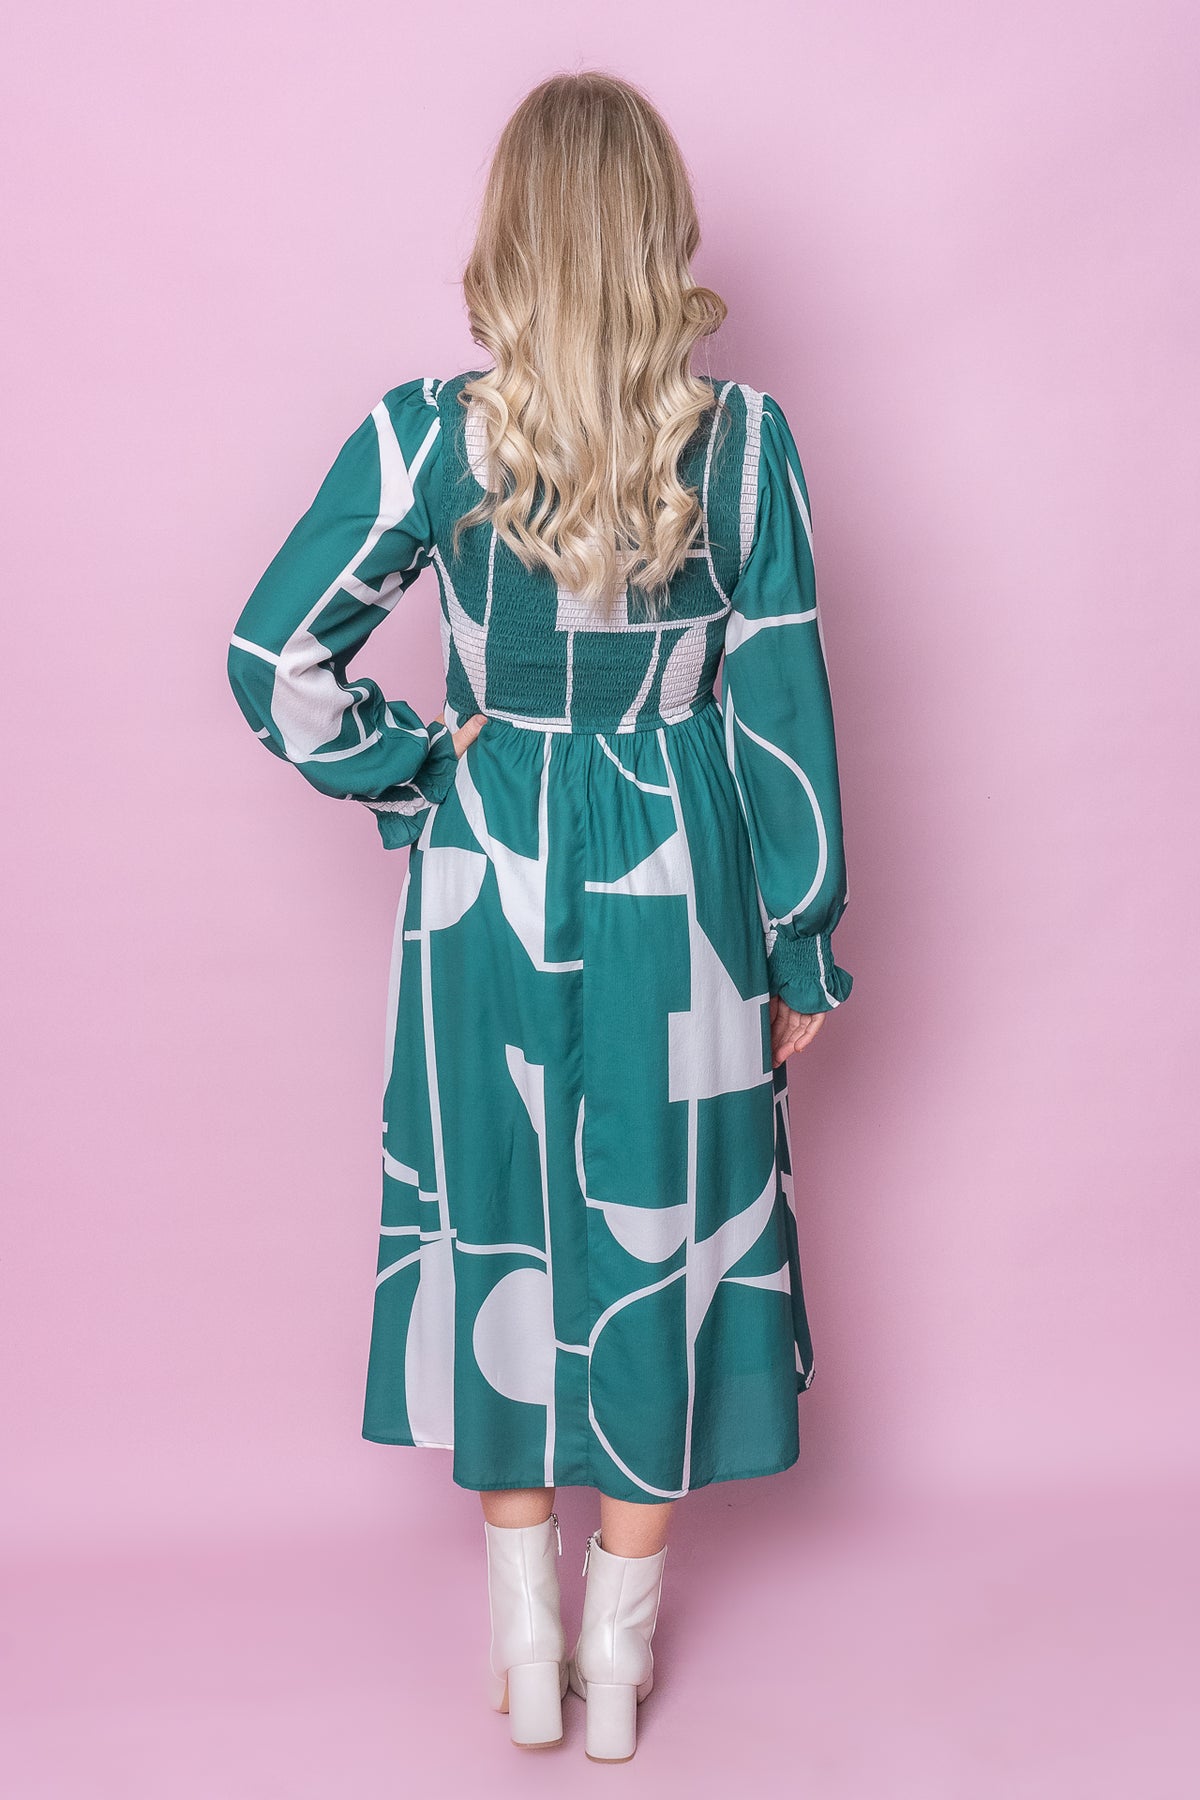 Charlie Dress in Emerald